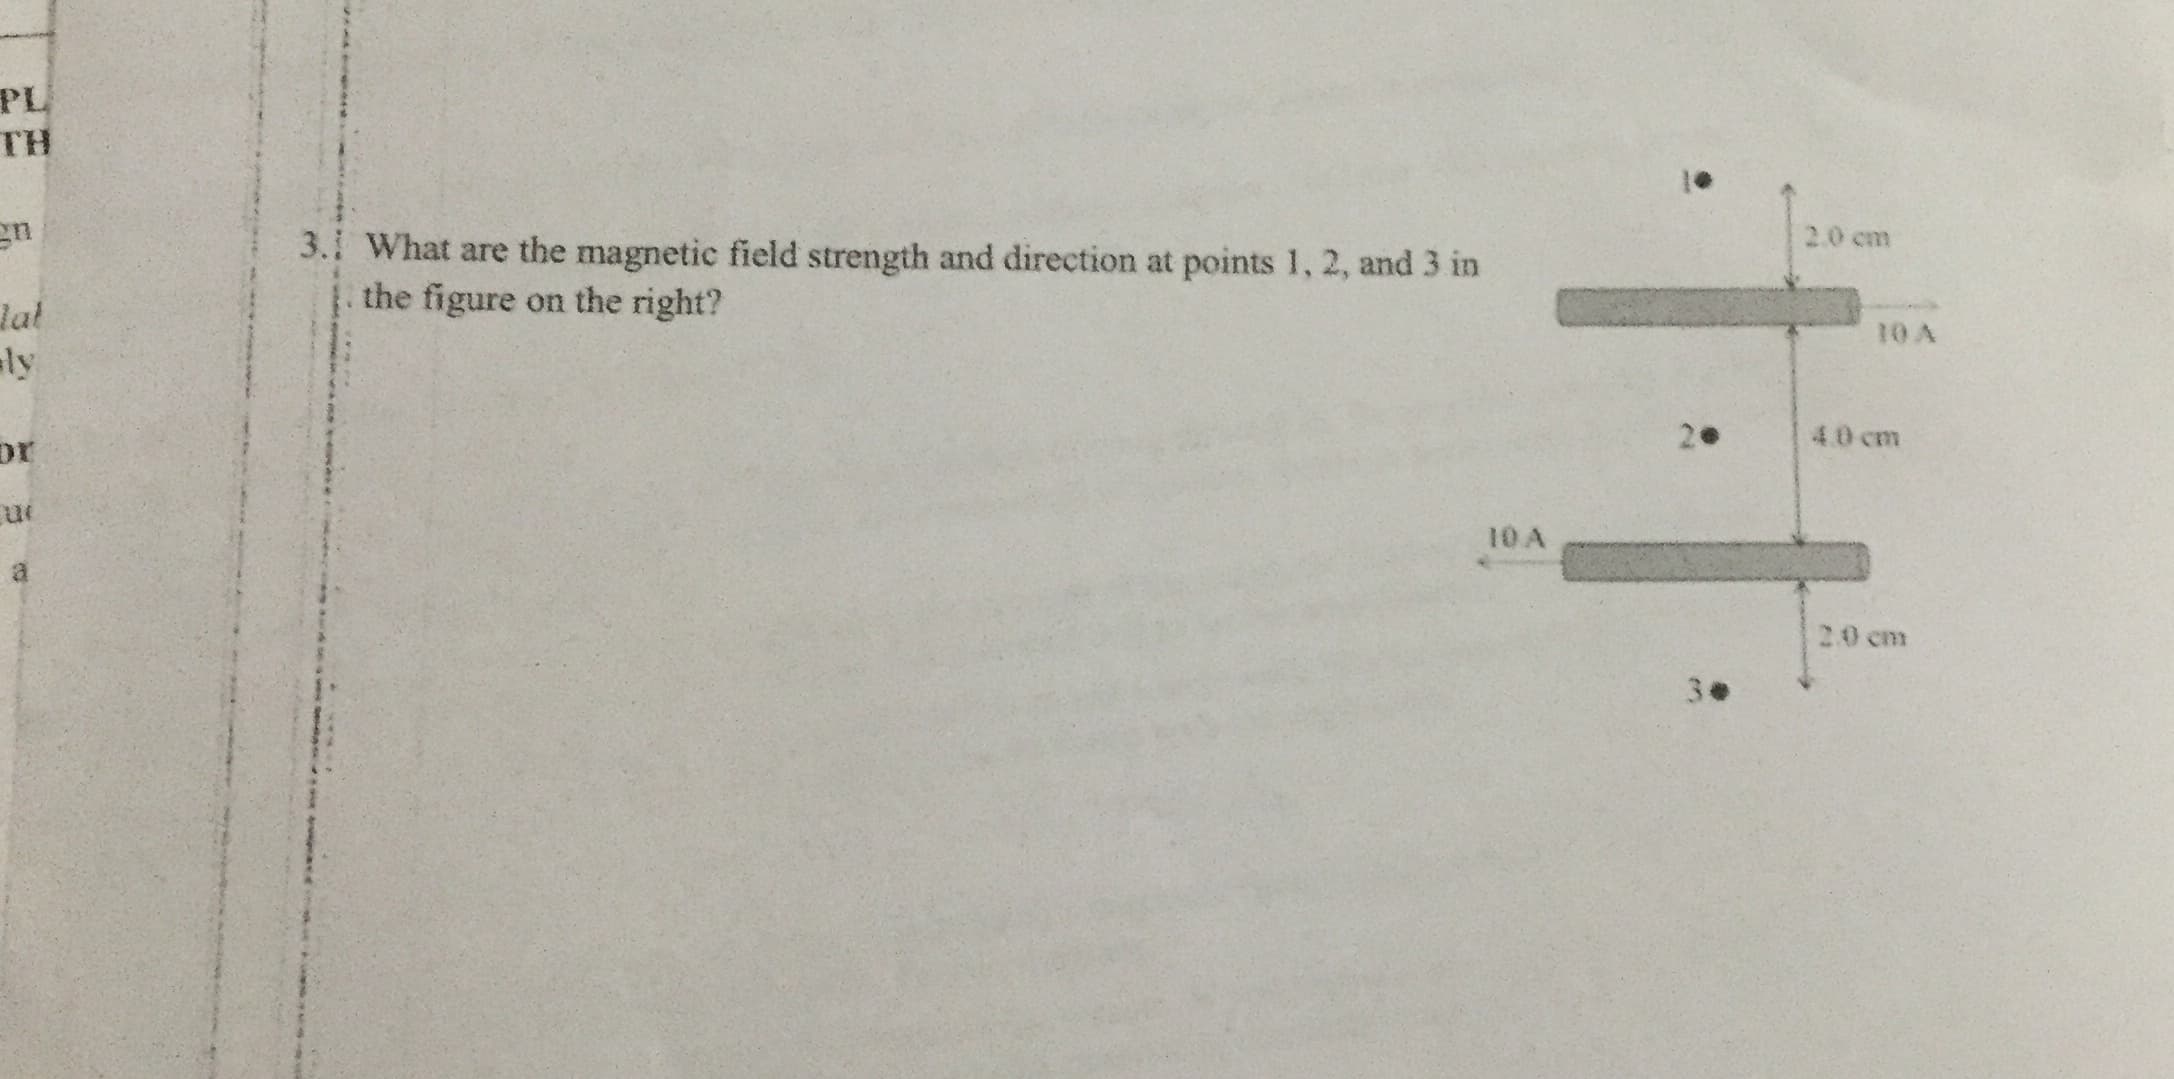 PL
TH
2.0 cm
3.1 What are the magnetic field strength and direction at points 1, 2, and 3 in
the figure on the right?
Jat
ly
4.0 cm
or
10 A
2.0 cm
3.
